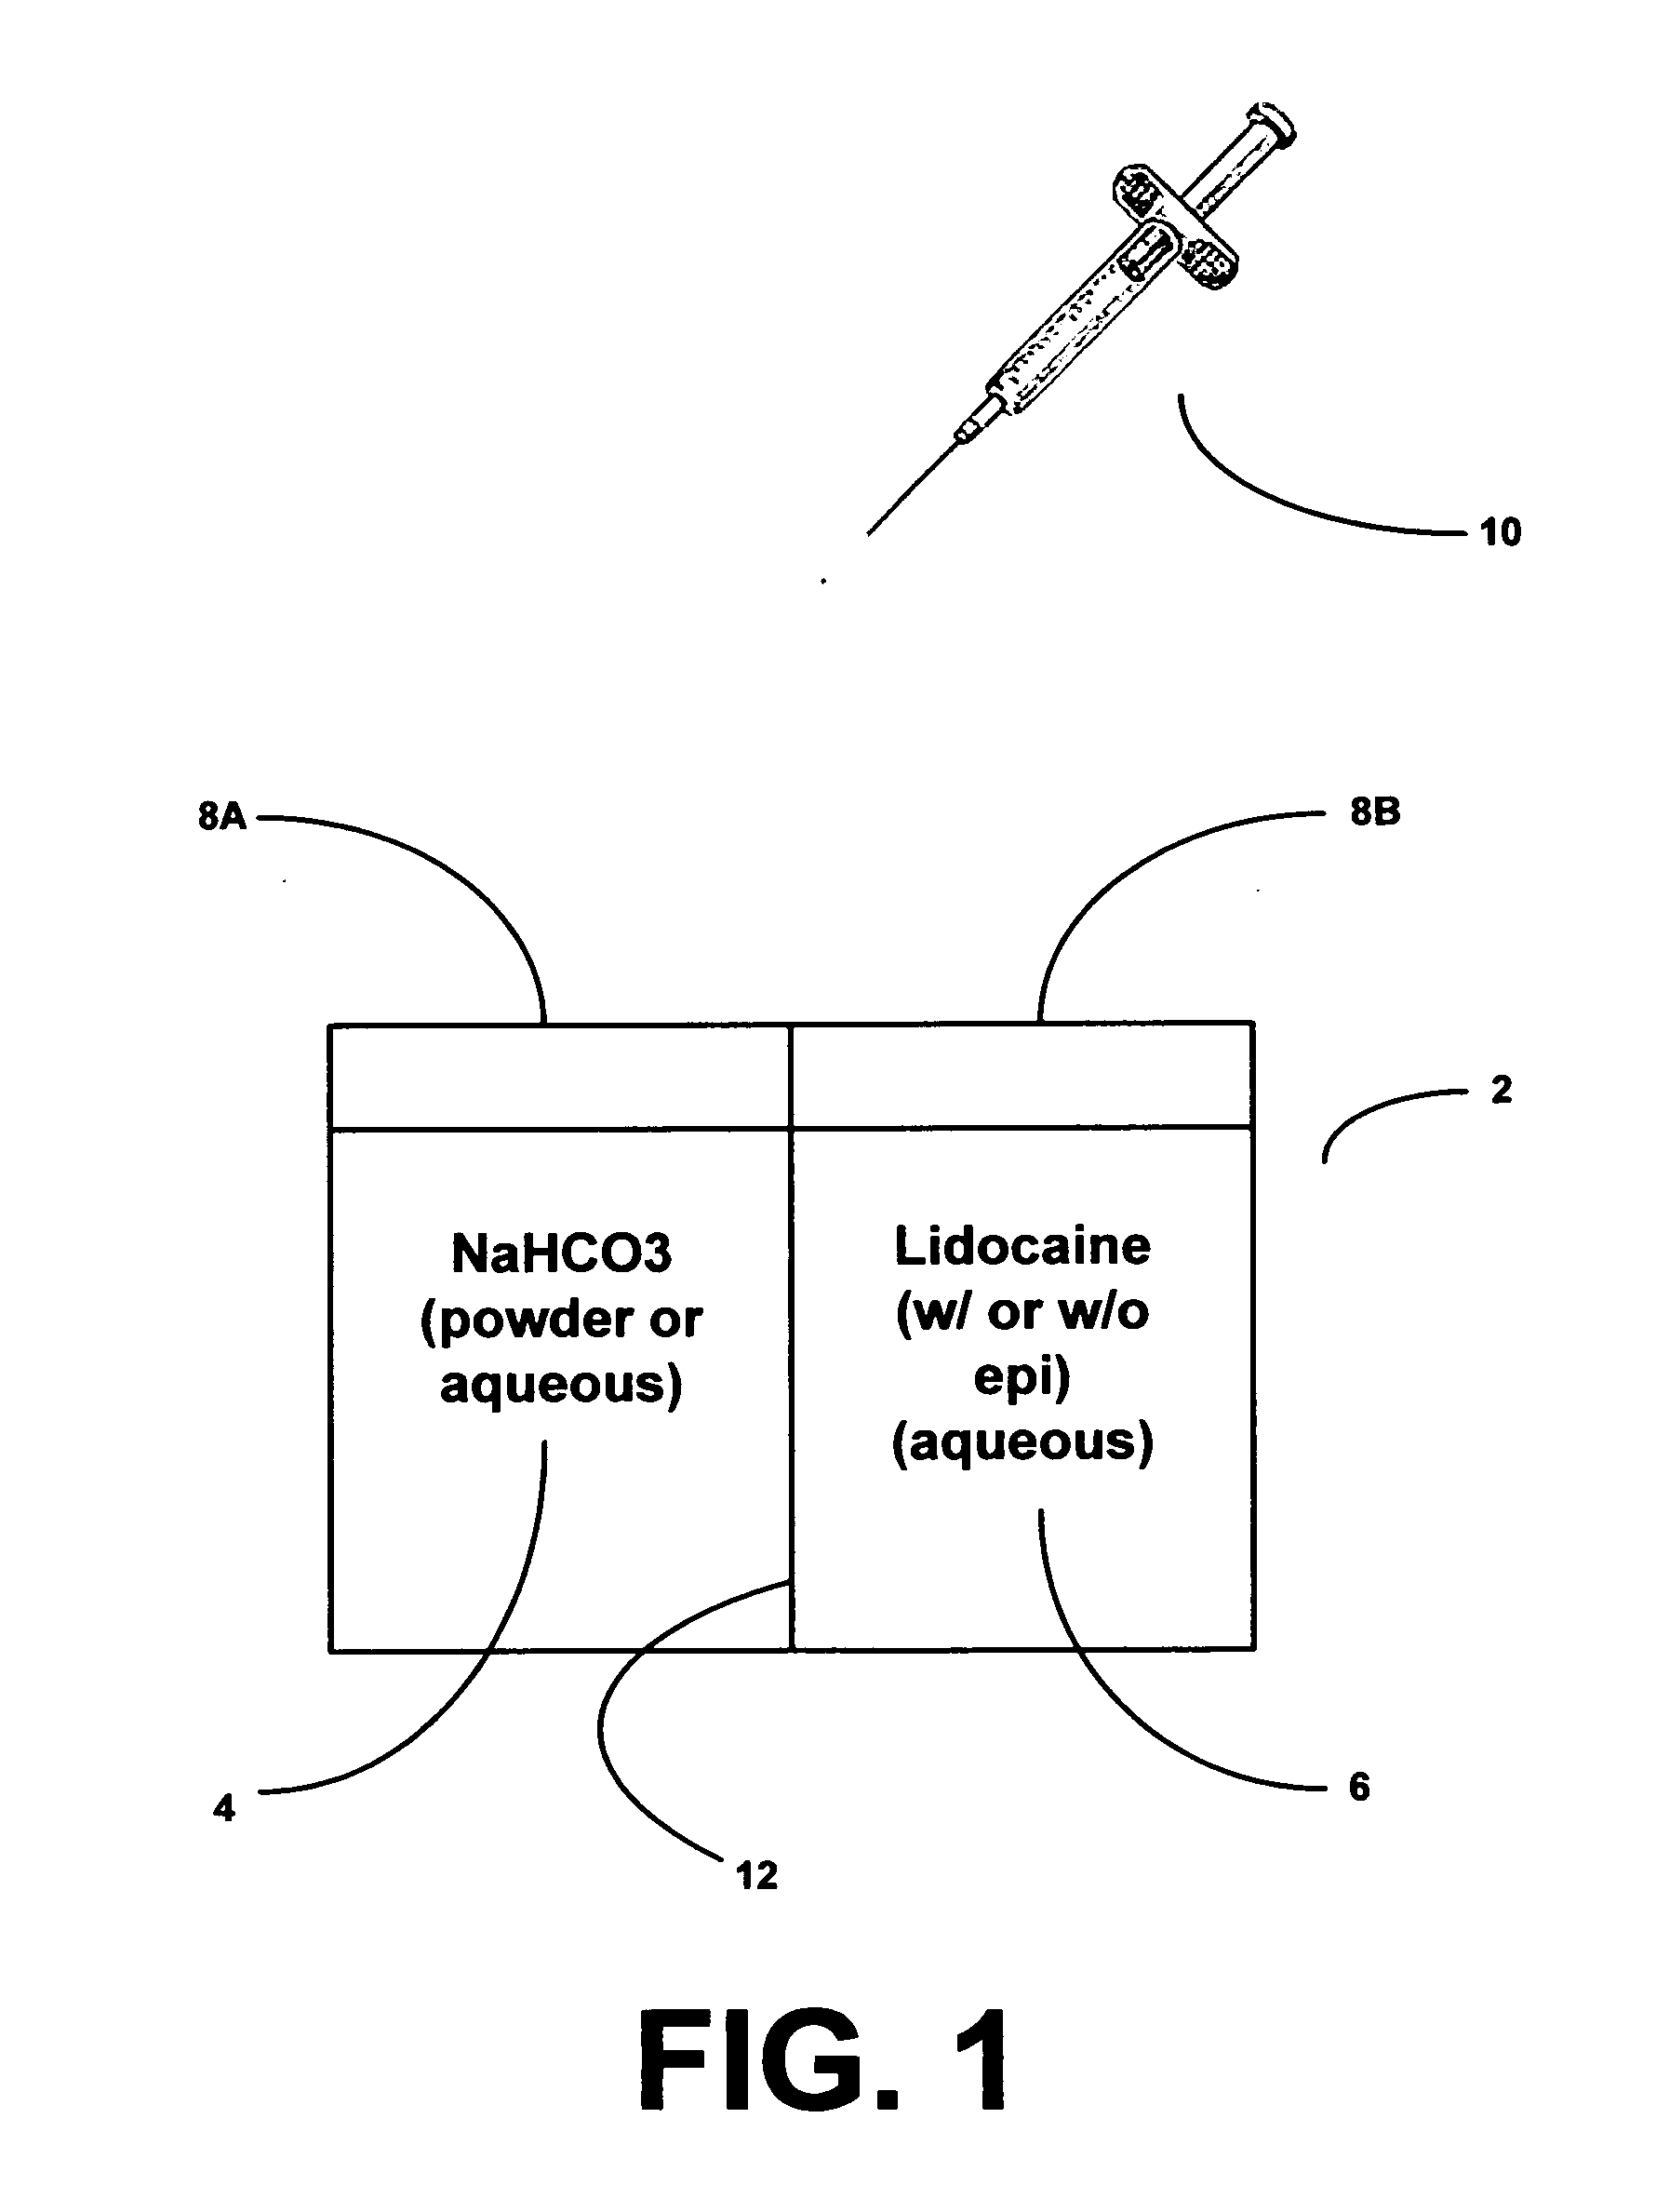 Method and apparatus for providing therapeutically effective dosage formulations of lidocaine with and without epinephrine